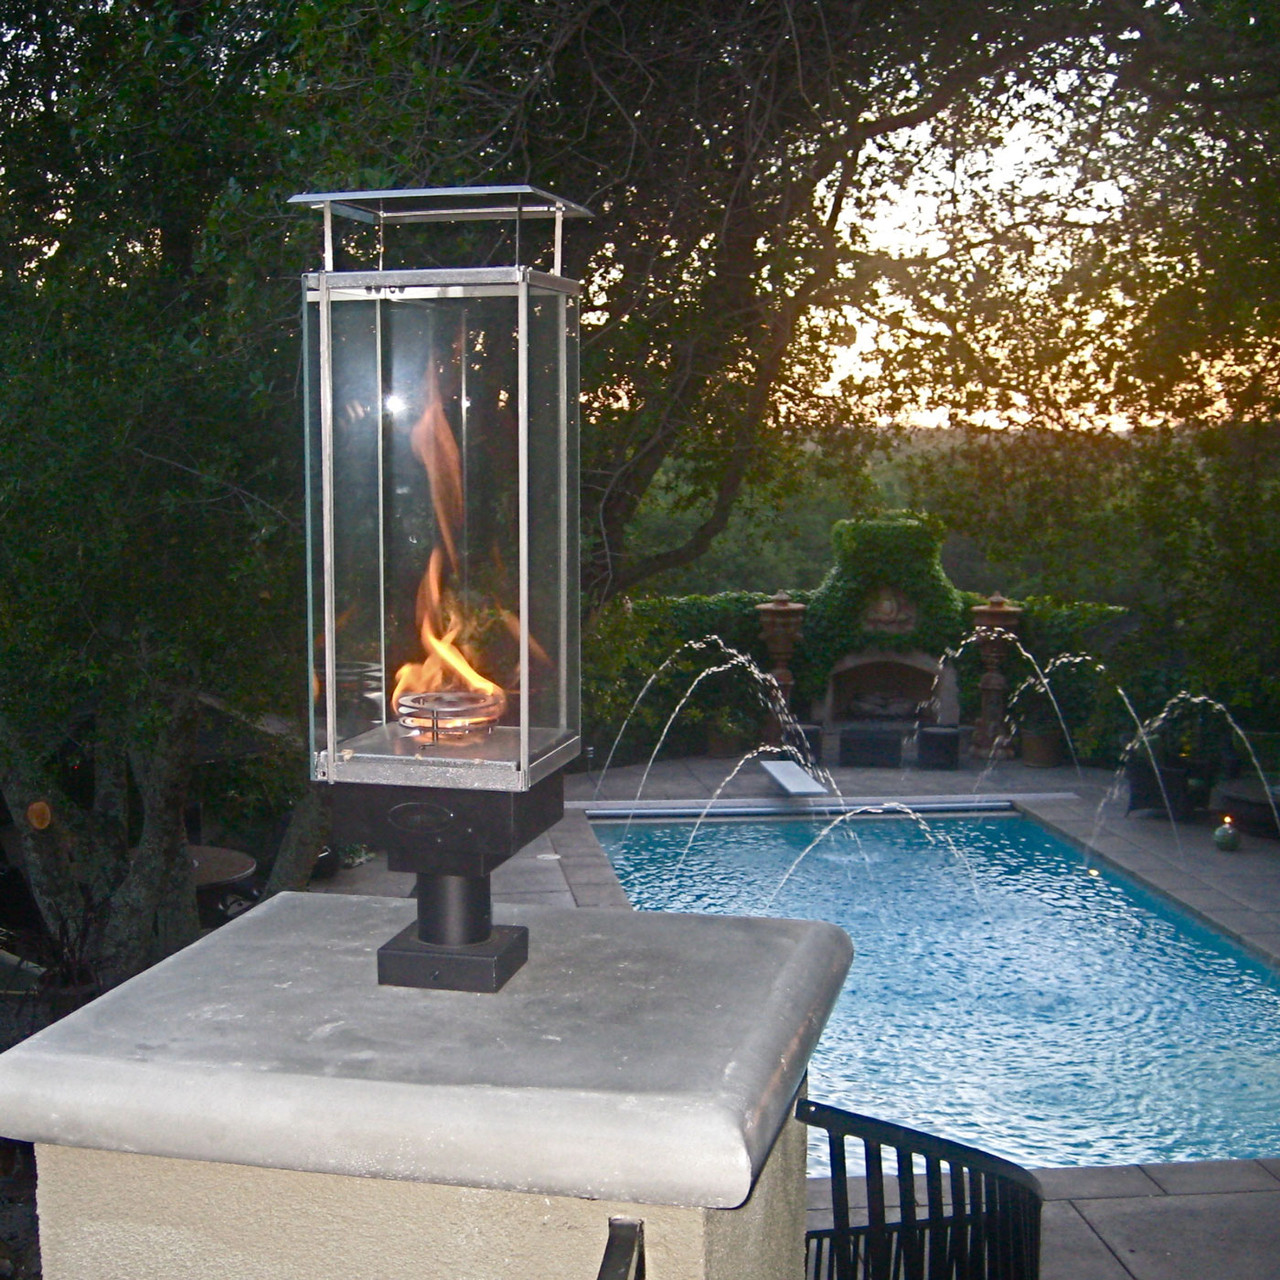 tempest torch lantern by poolside on back patio